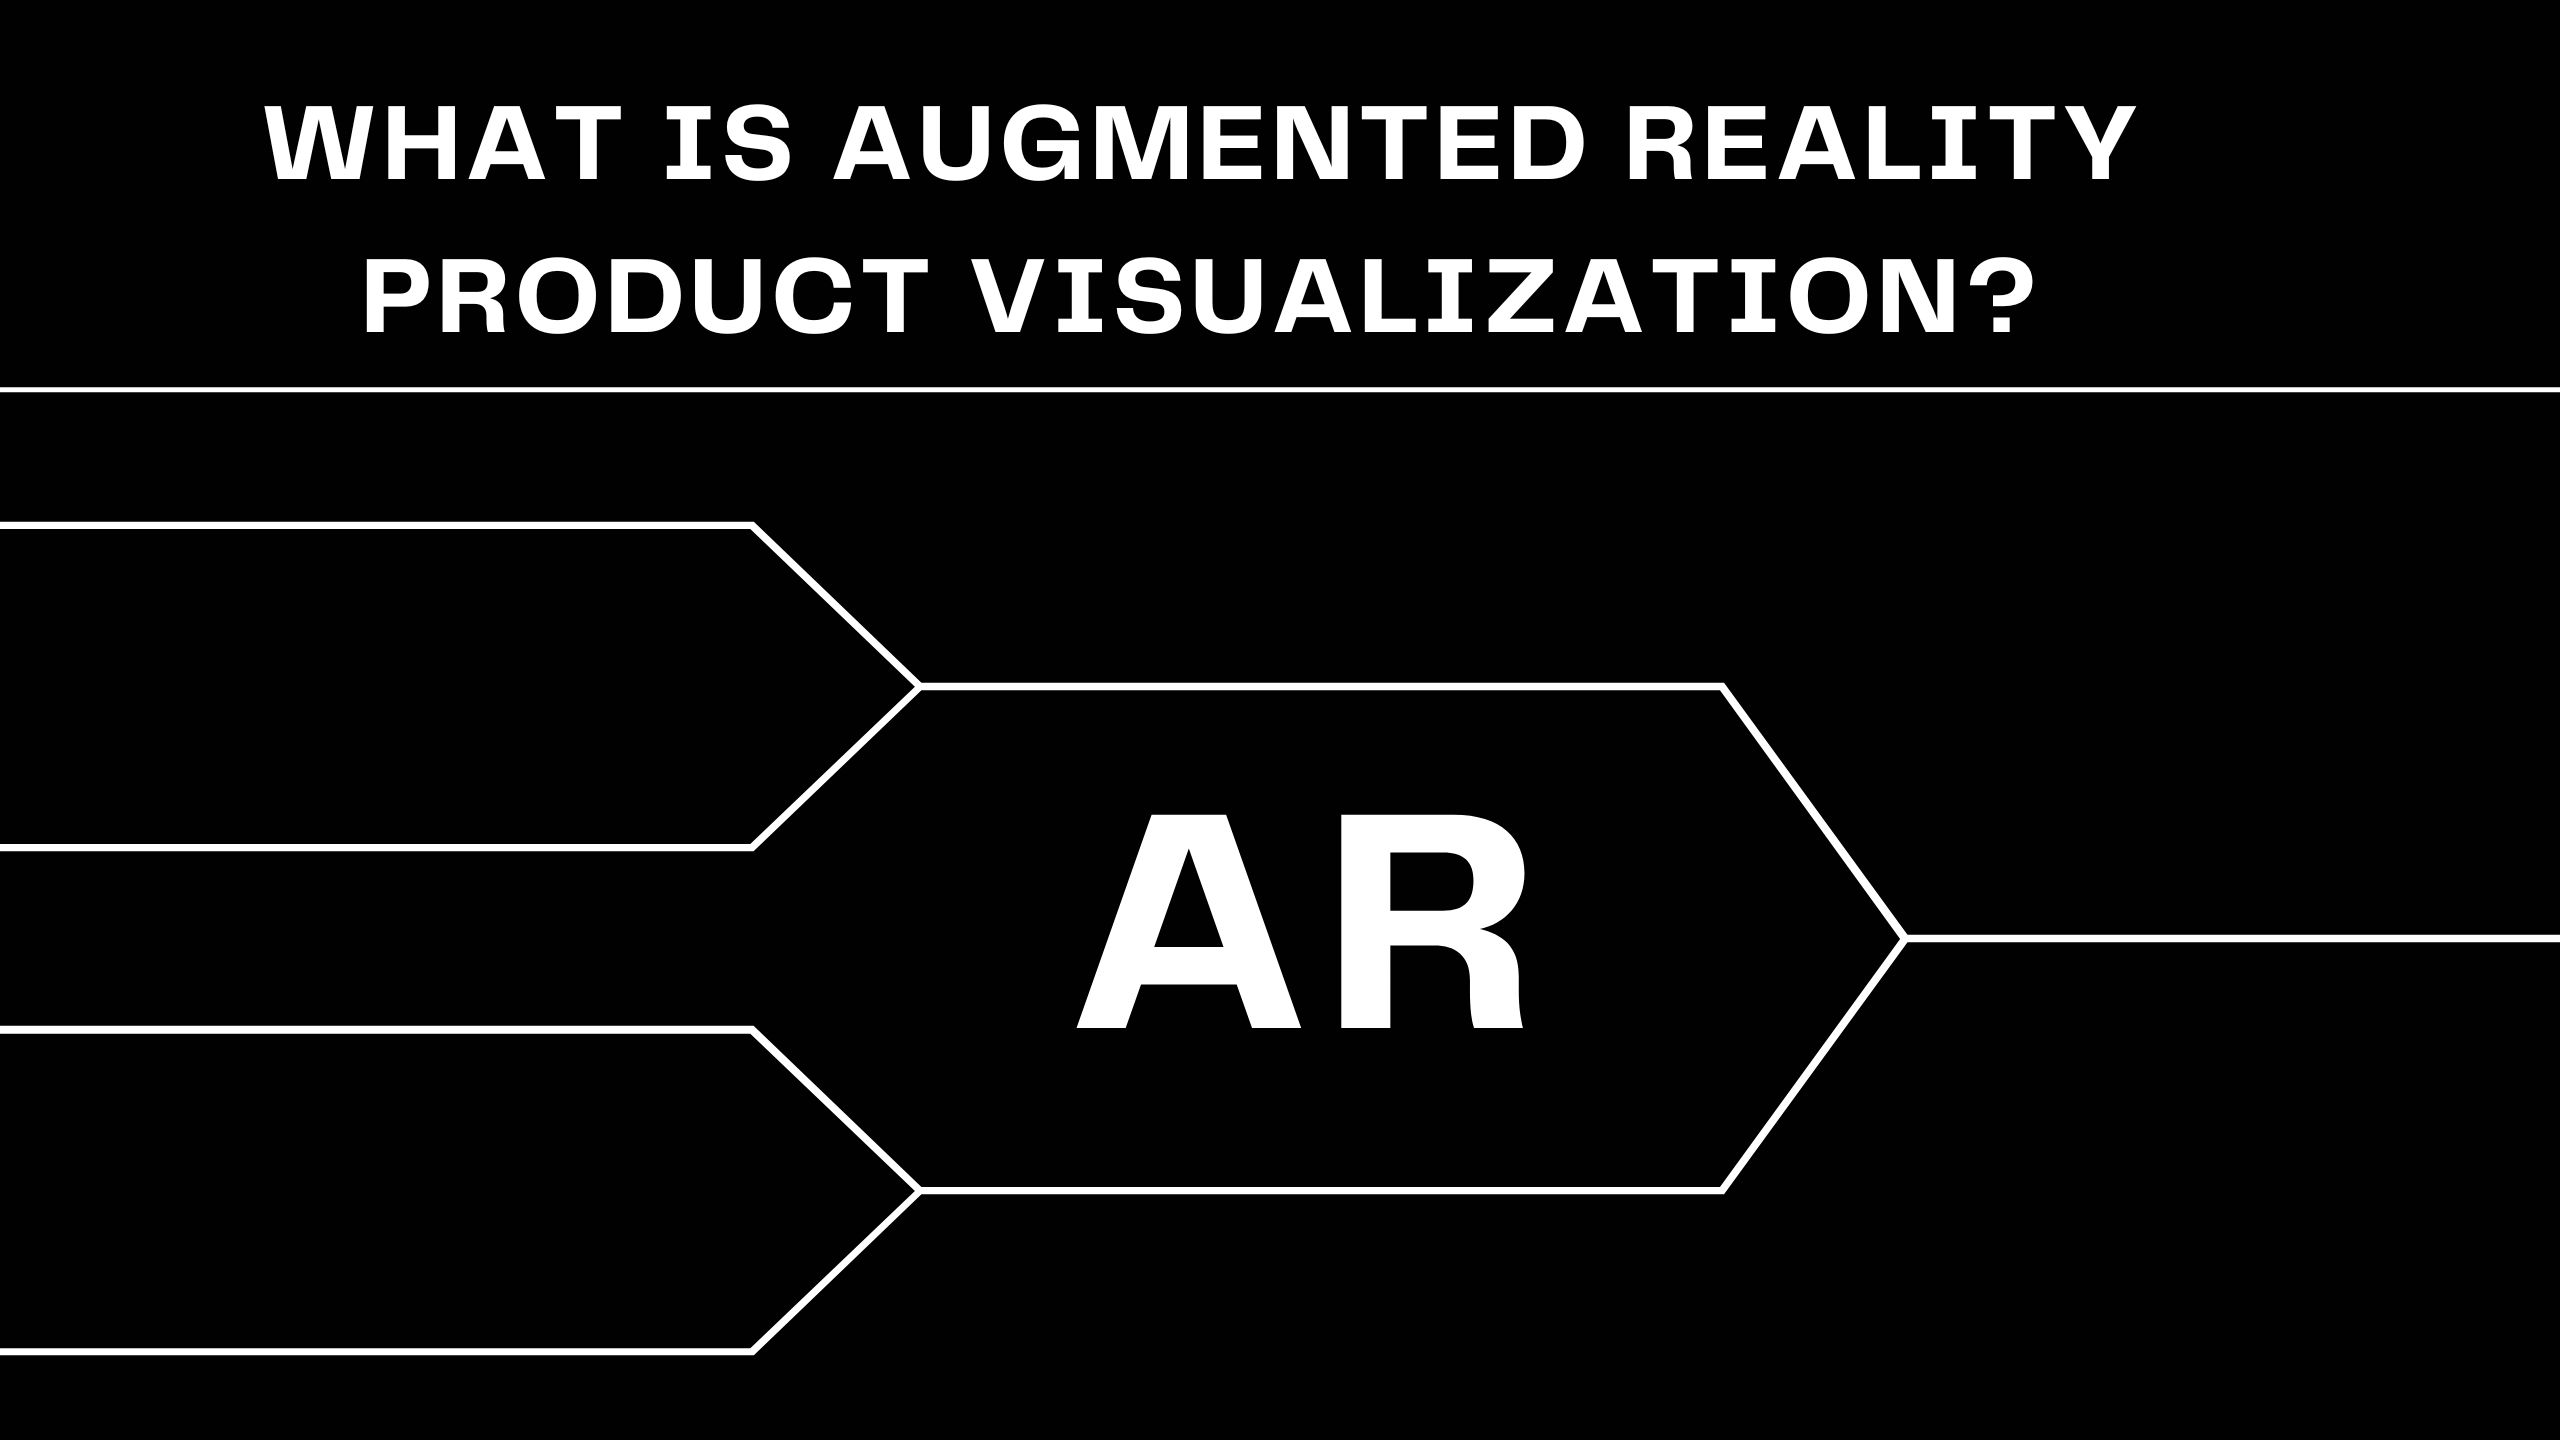 What is Augmented Reality Product Visualization?